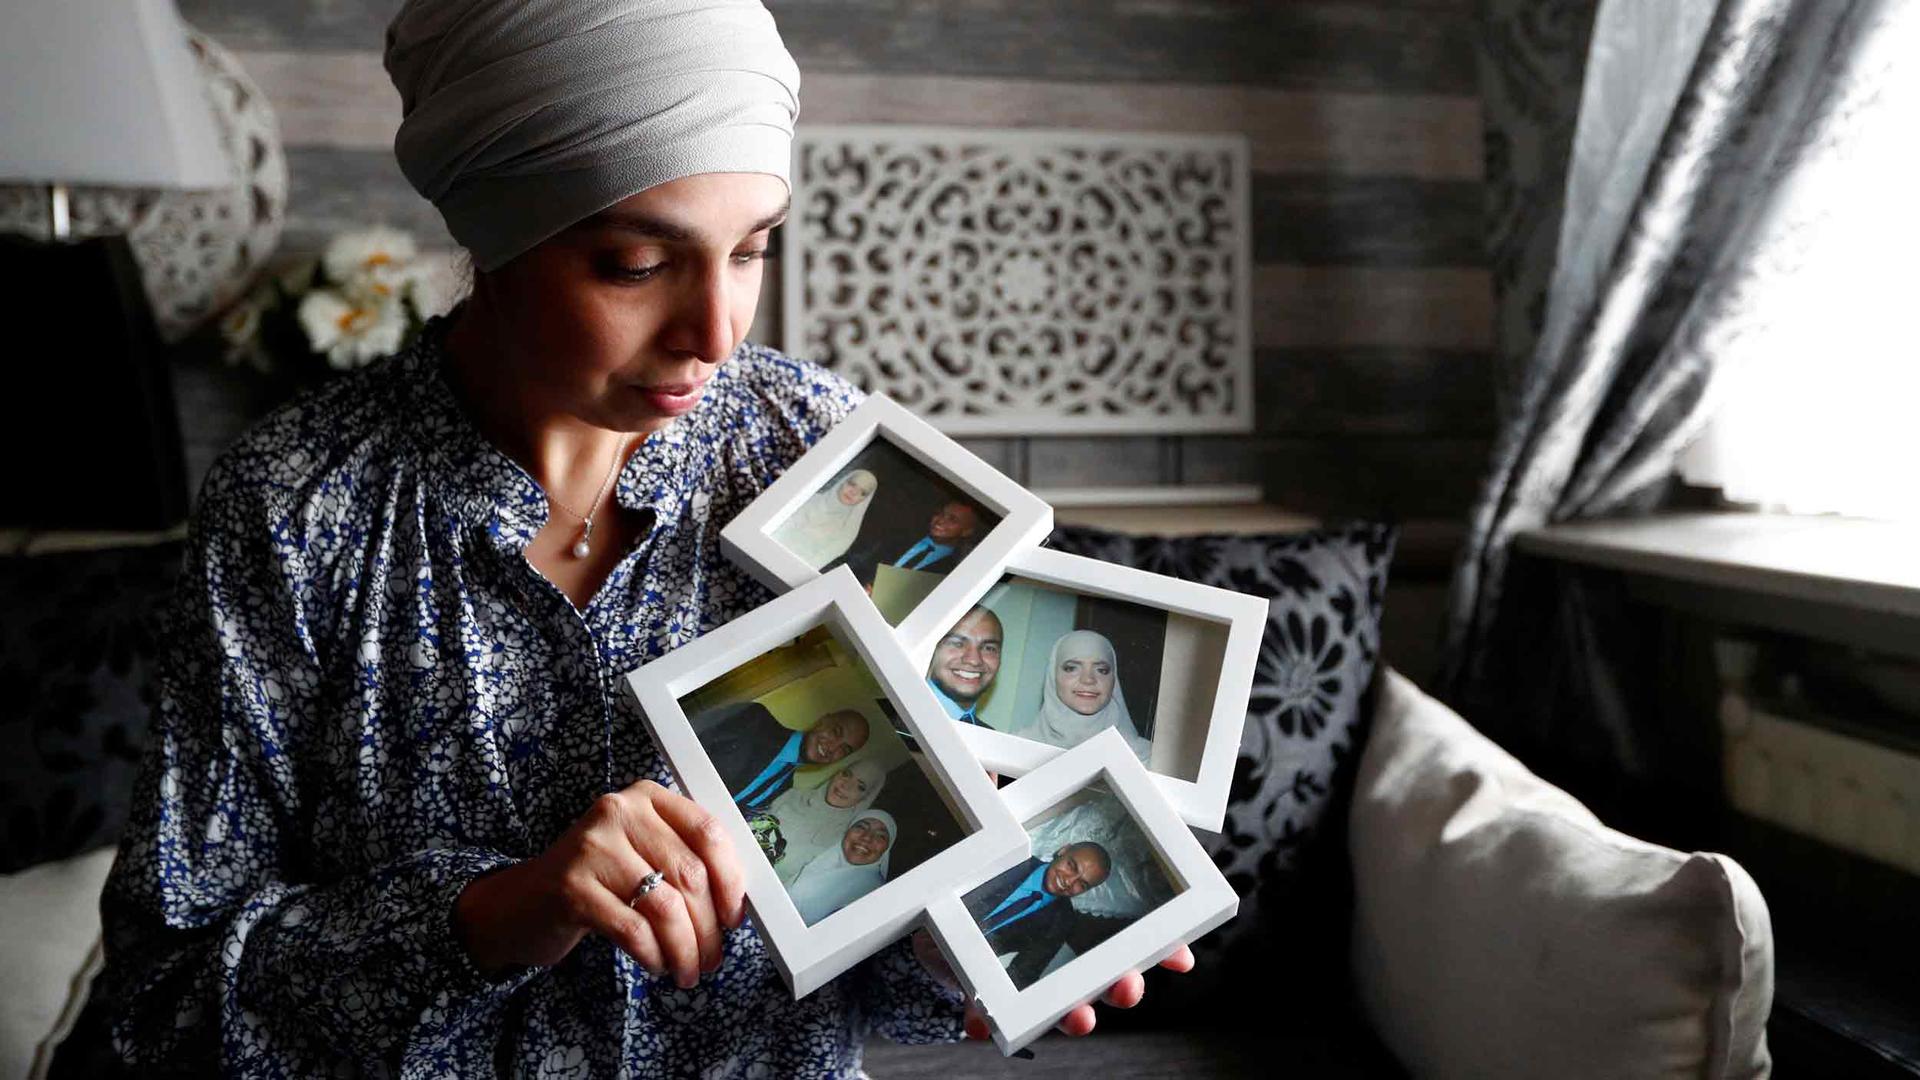 A woman holds framed pictures of family members in her hands